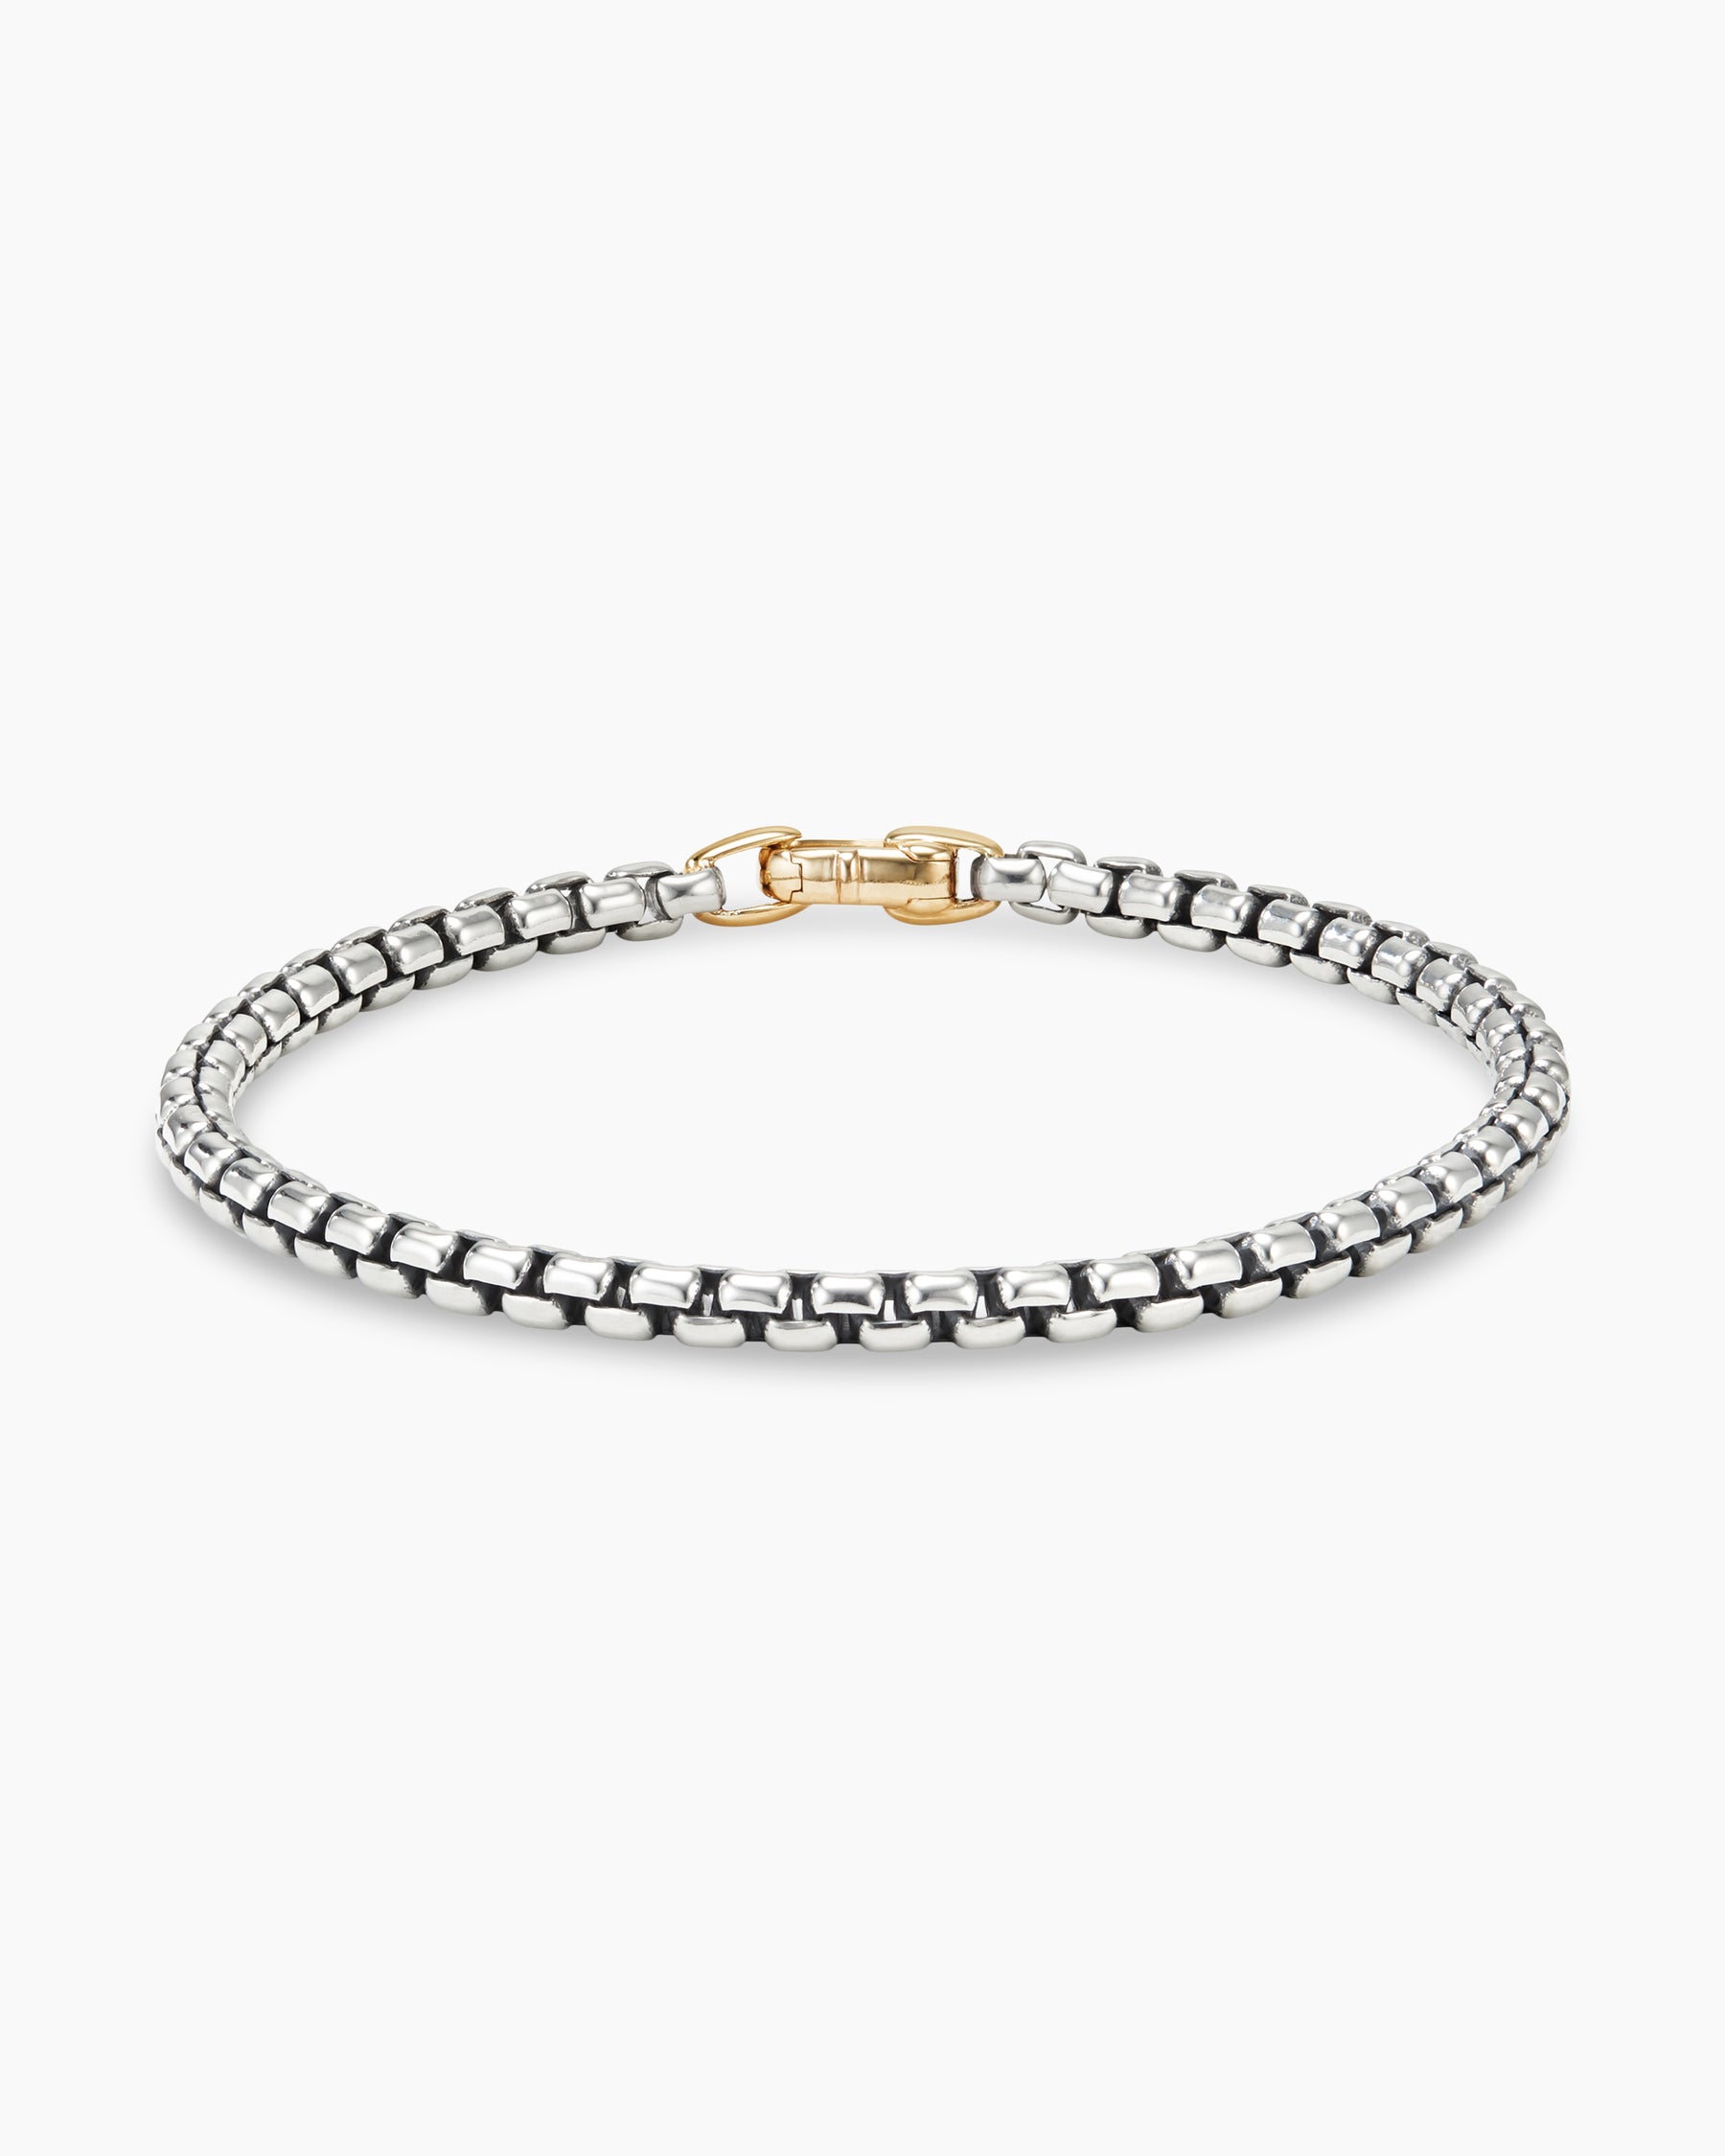 DY Bel Aire Color Box Chain Bracelet in Hot Pink Acrylic with 14K Rose Gold  Accent, 4mm